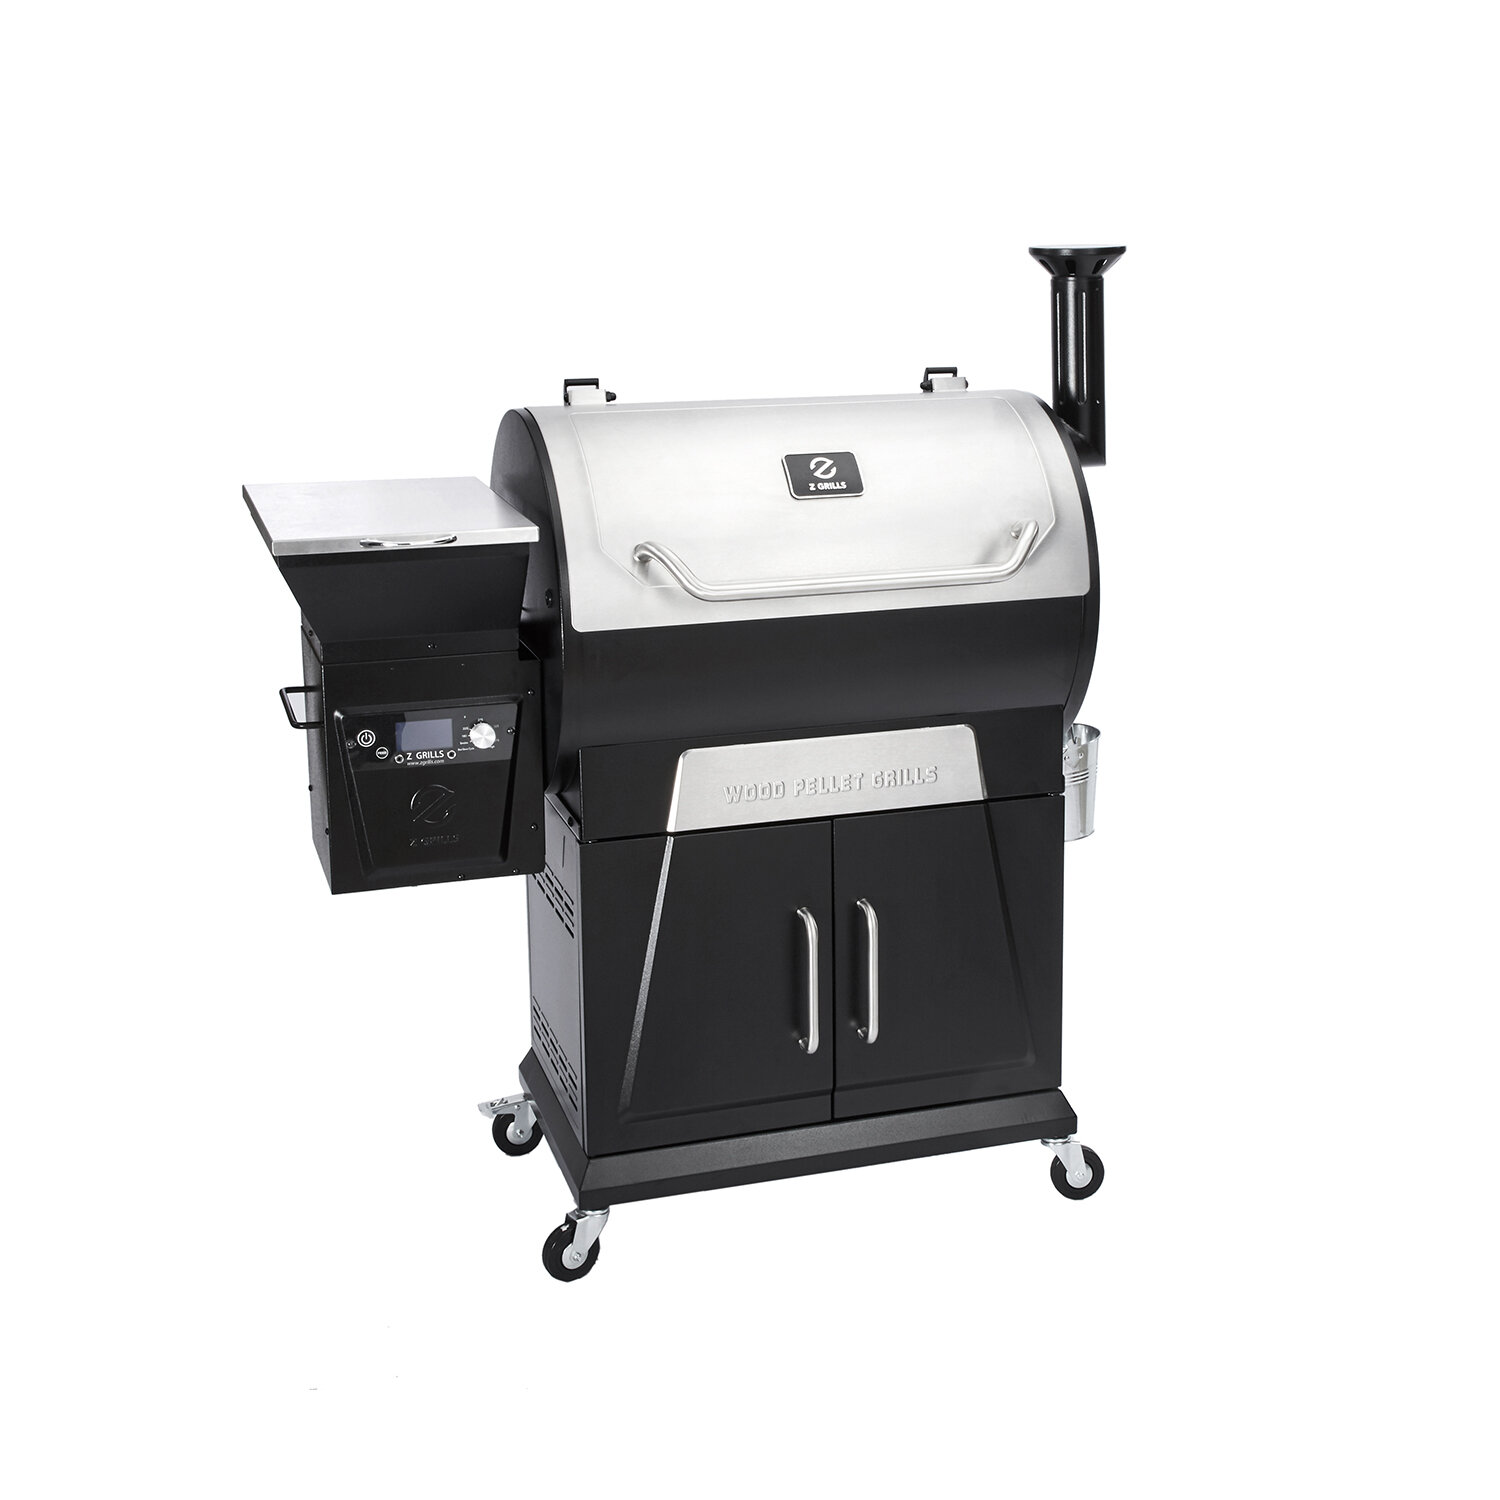 Cuisinart 256-sq. in. Portable Wood Pellet Grill and Smoker, Black